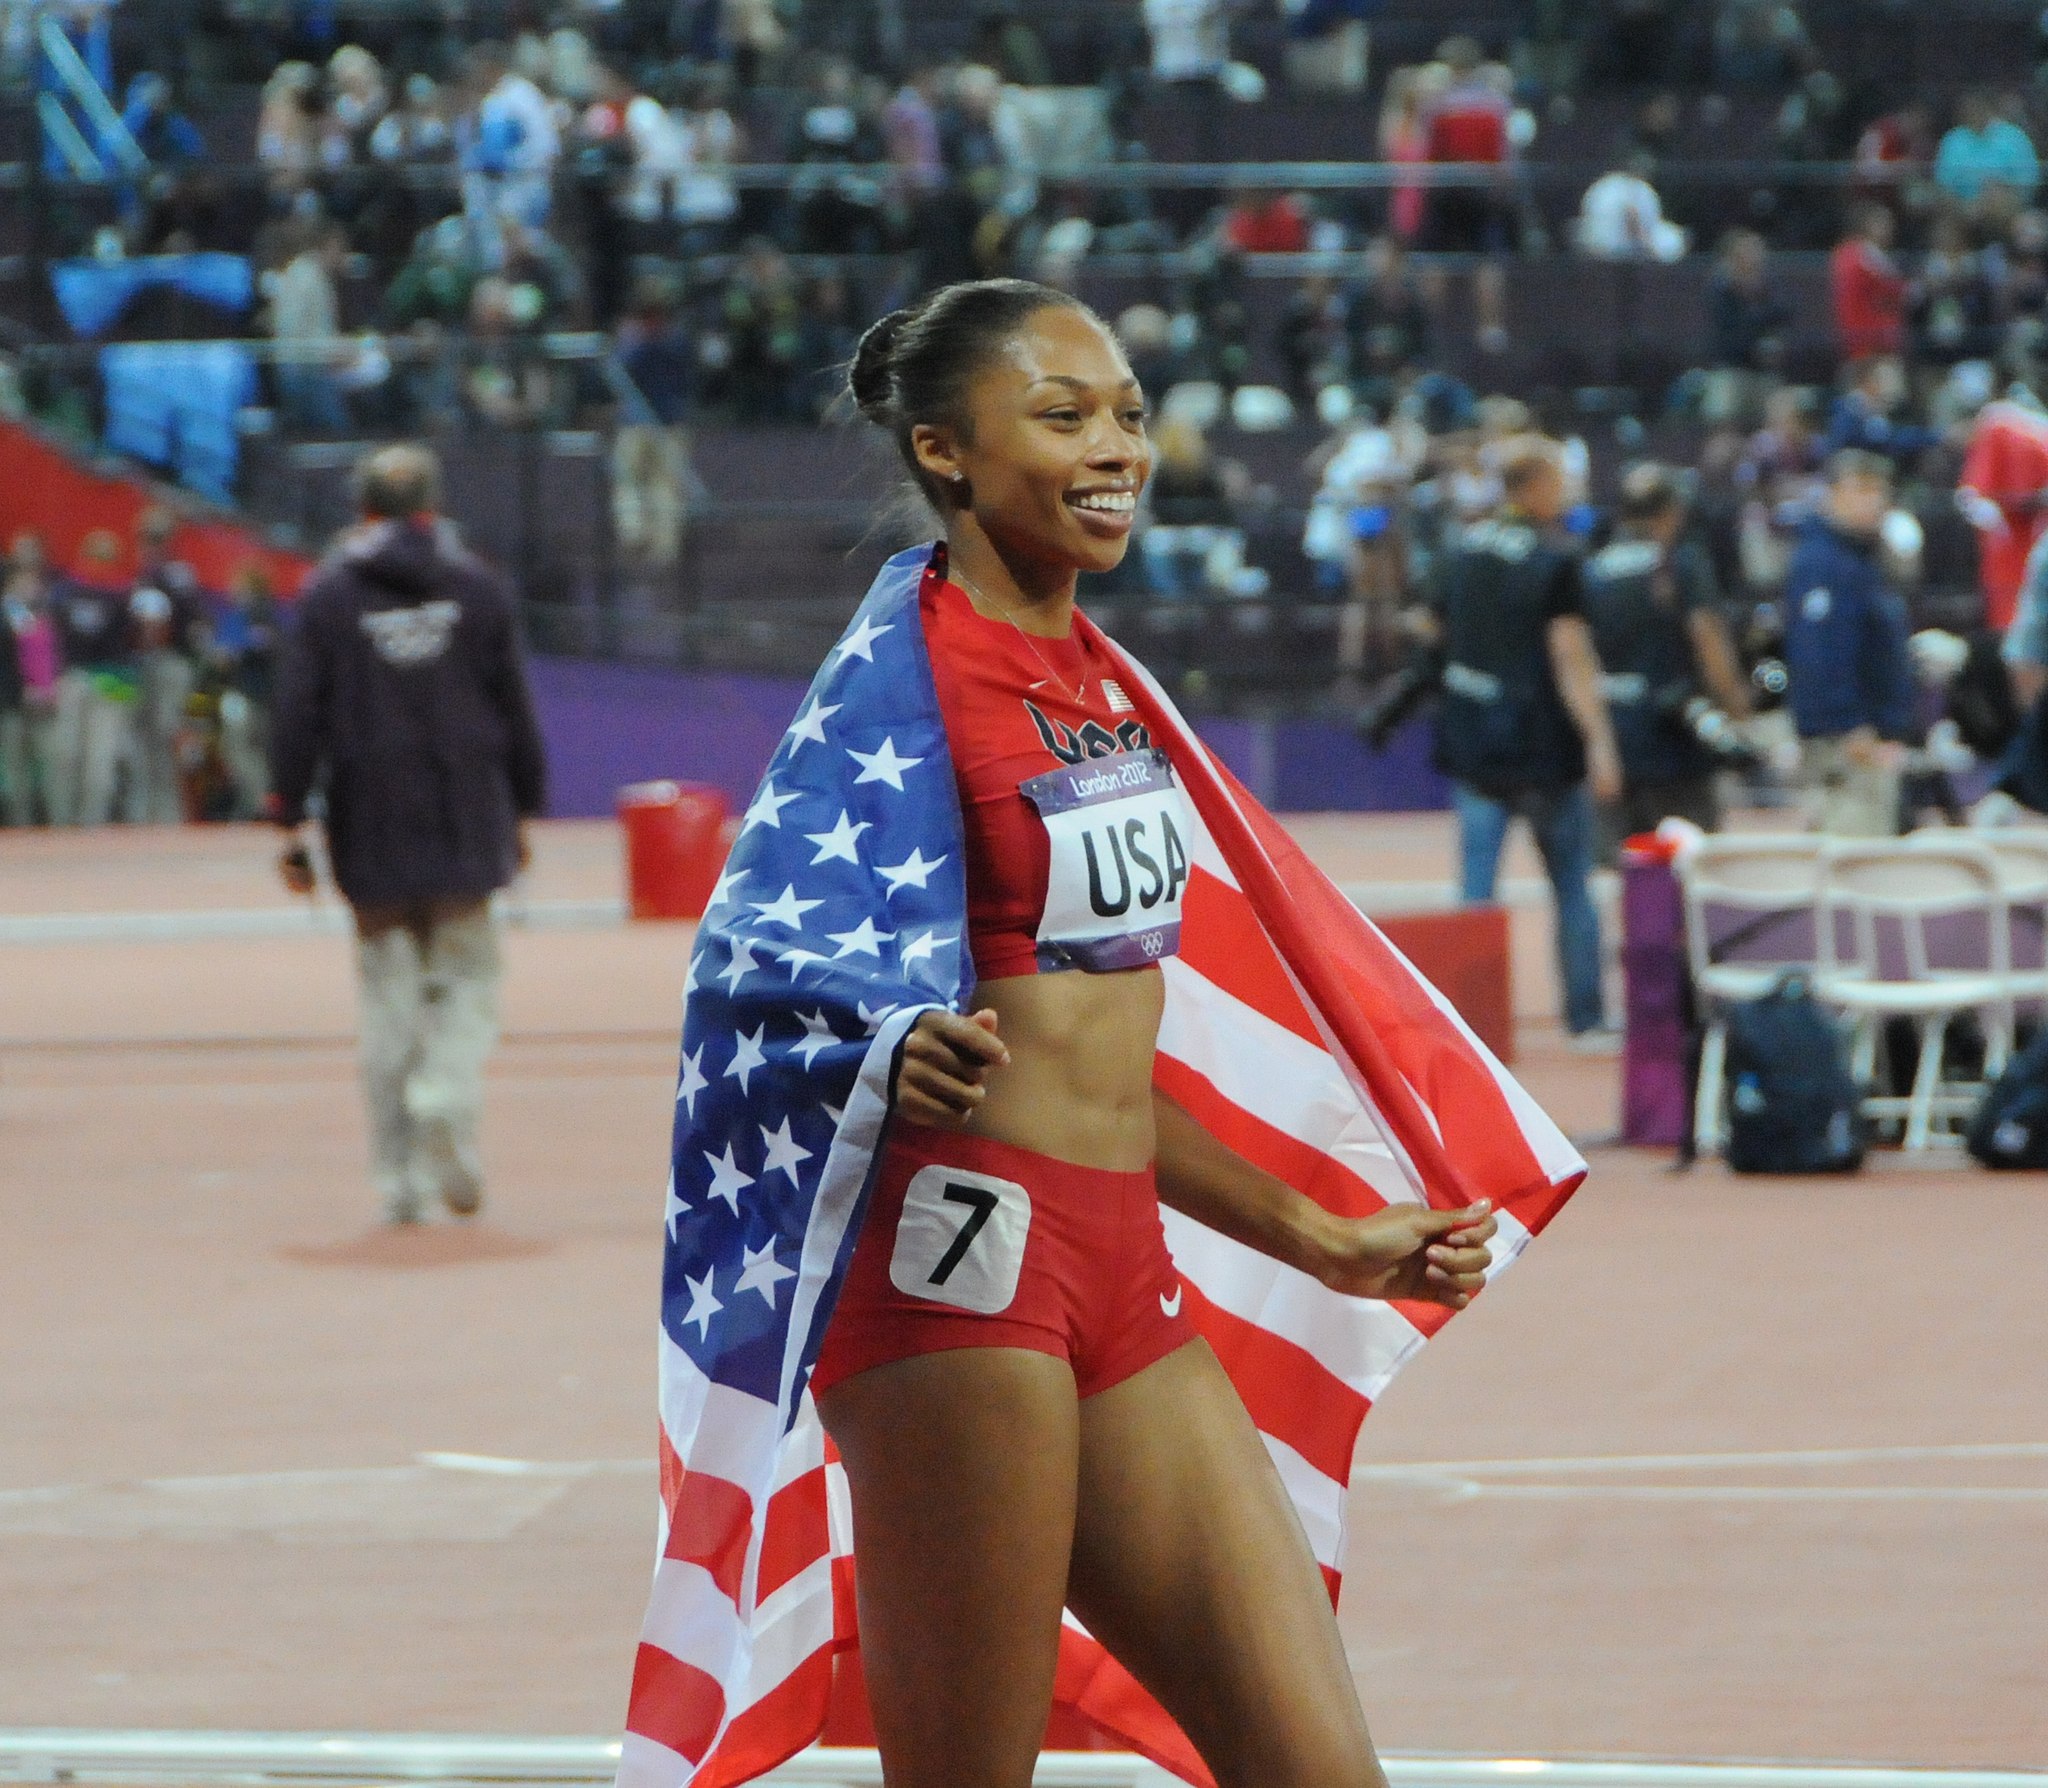 Allyson Felix shoes, Winning 400 meter race in Saysh after Nike